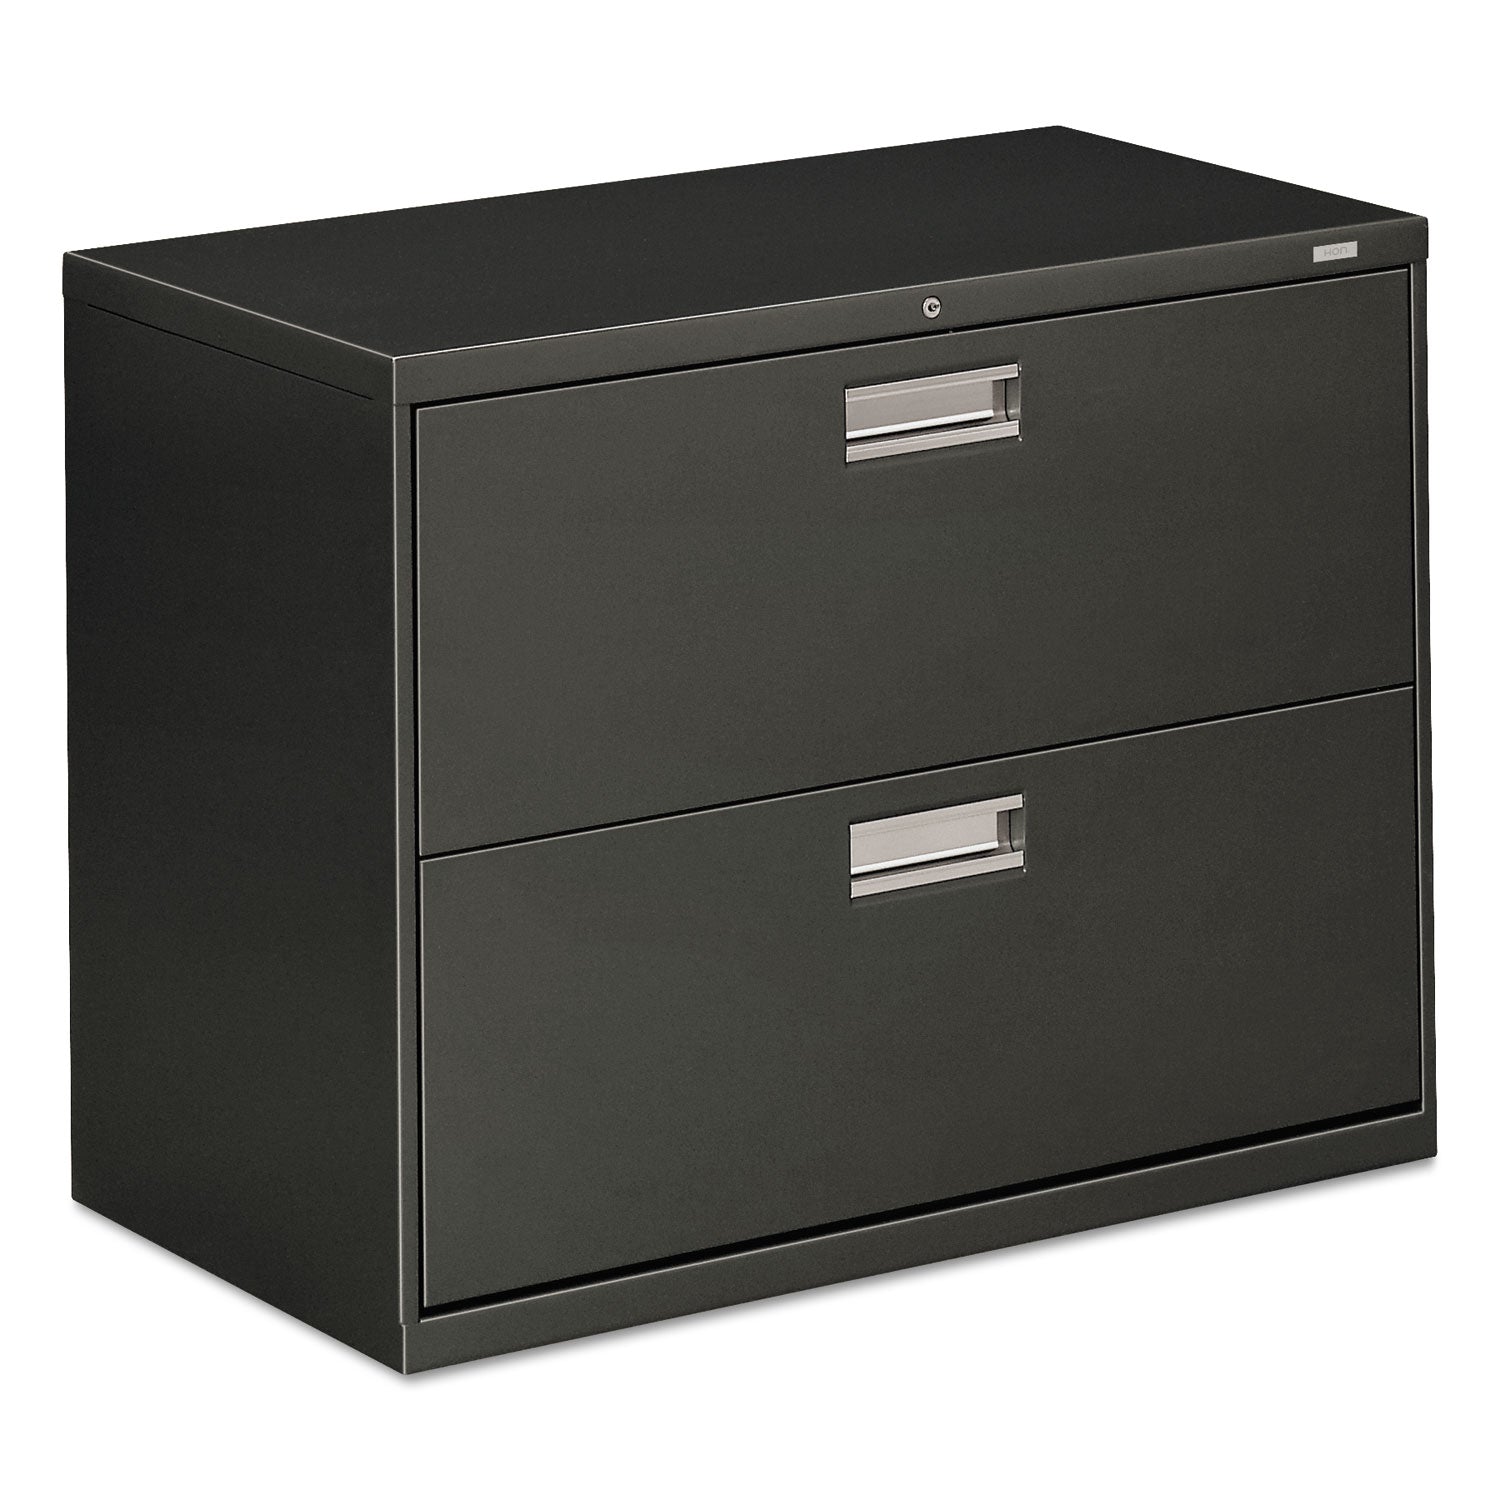 Brigade 600 Series Lateral File, 2 Legal/Letter-Size File Drawers, Charcoal, 36" x 18" x 28 - 